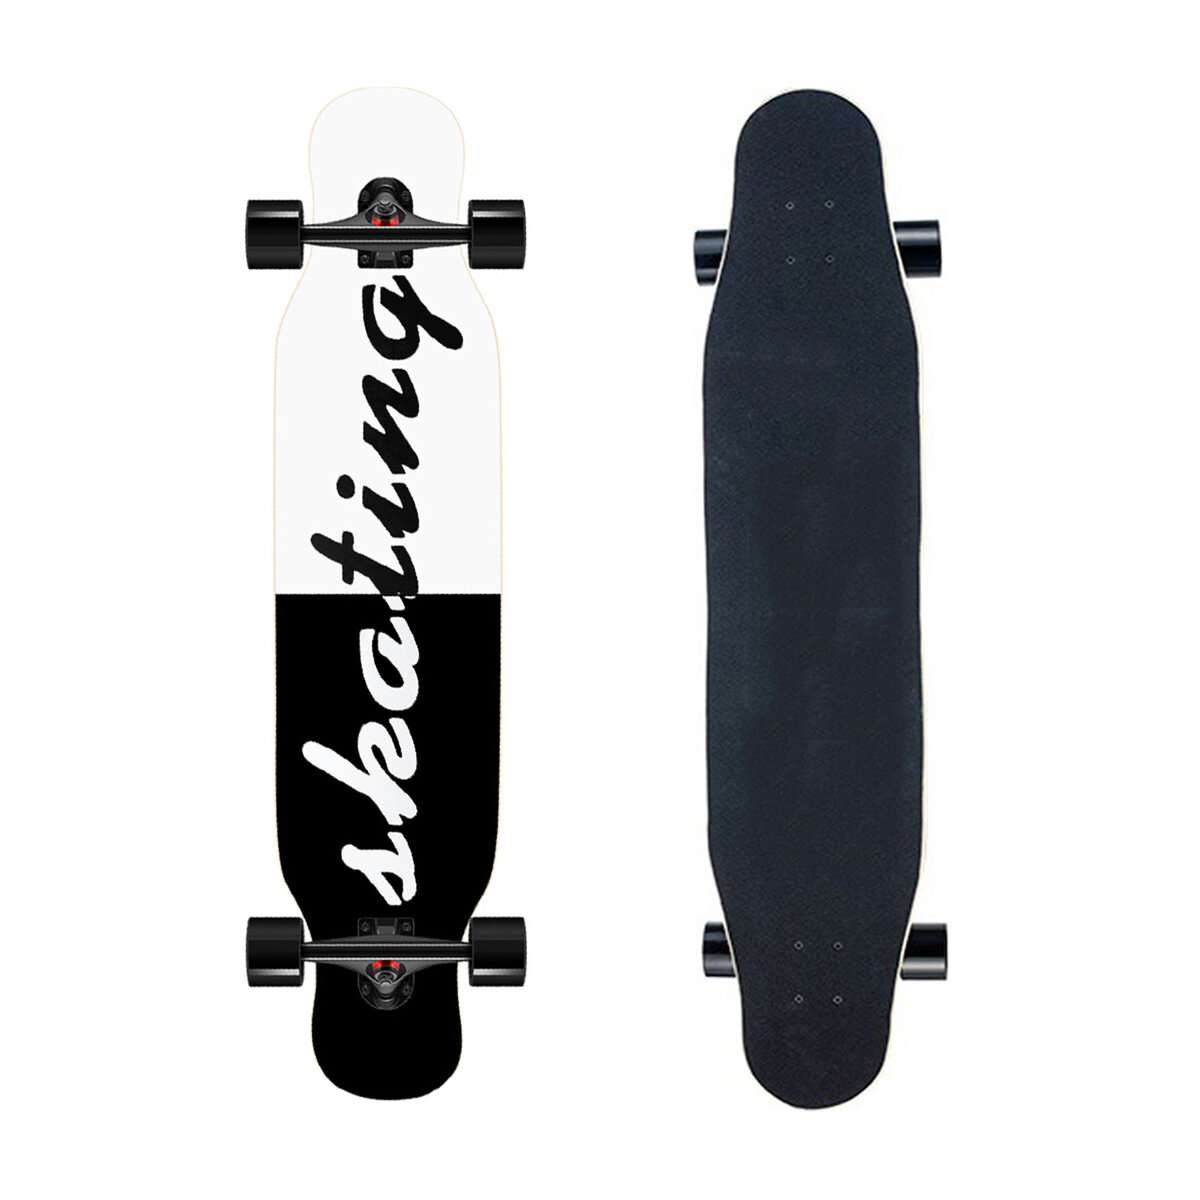 VEHS H34577 42inch Complete Standard Skateboards 9 Layer Canadian Maple Double Kick Concave Longboard for Beginner Kids